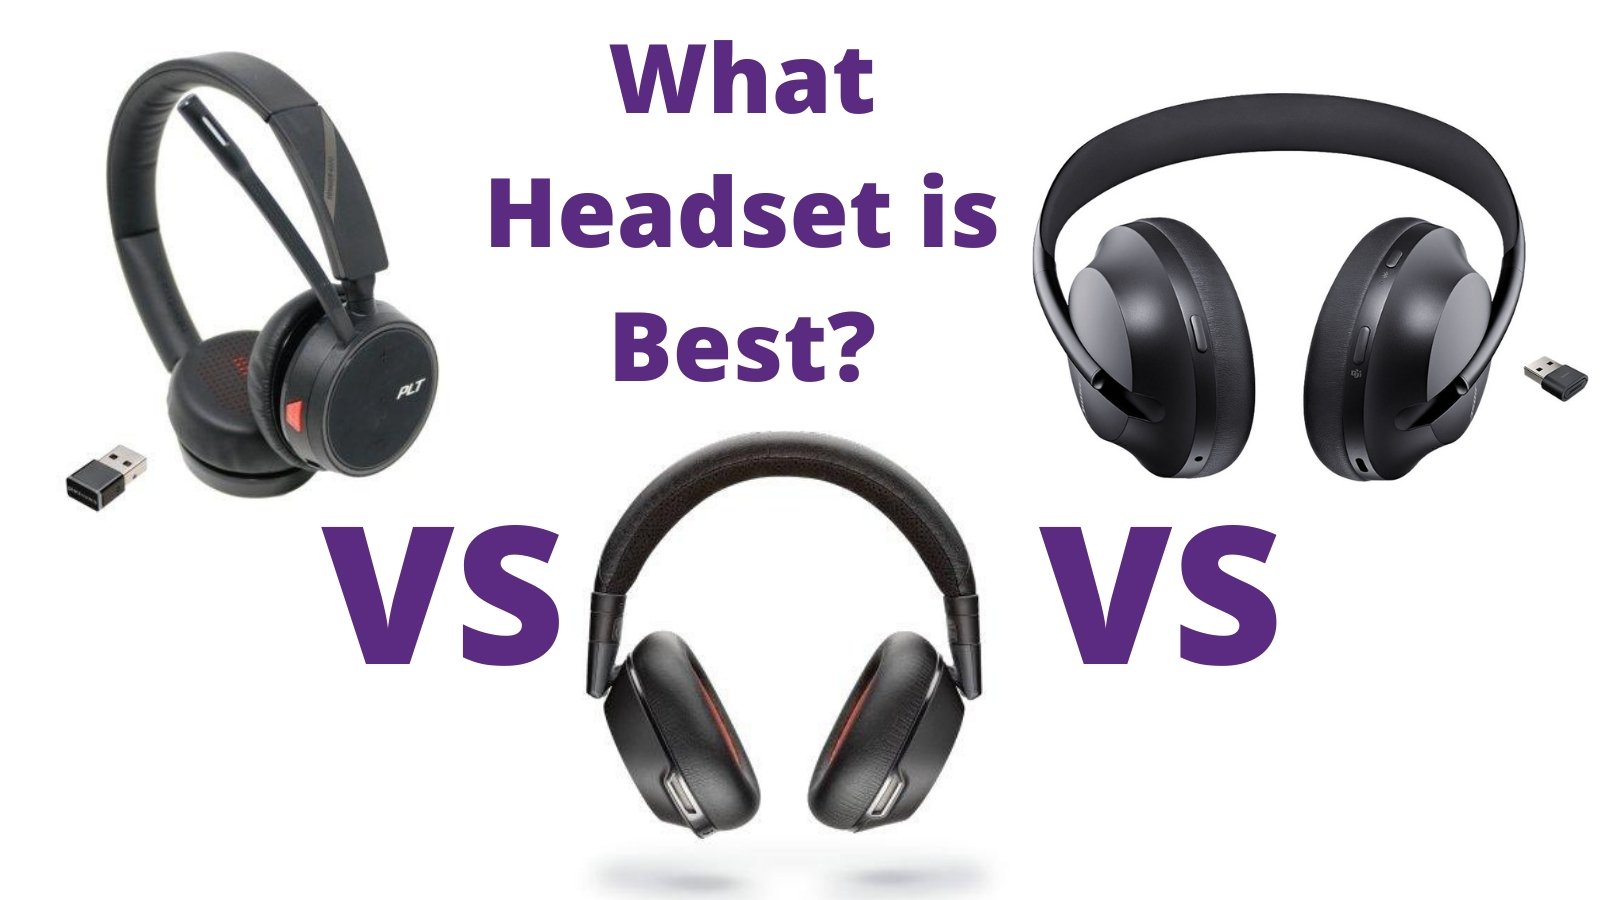 What Bluetooth headset is best? Poly 4220 UC vs Poly 8200 UC vs Bose 700 UC - Headset Advisor